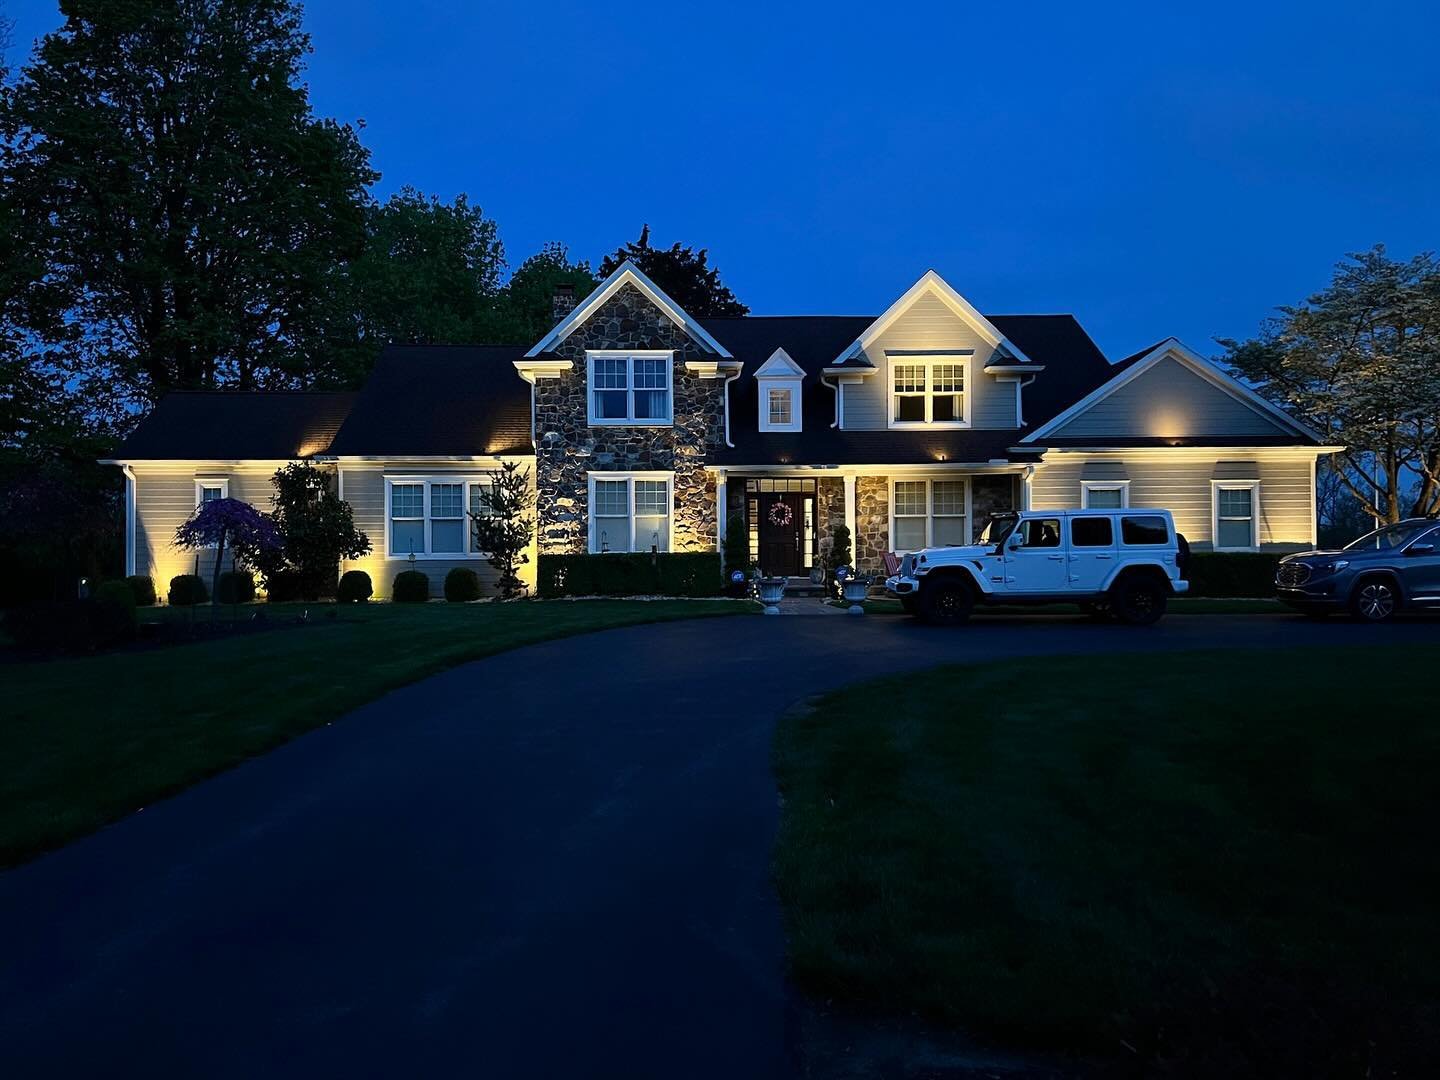 Give your home the curb appeal it deserves with 
decorative landscape lighting 🏠

#uplighting #landscapelighting